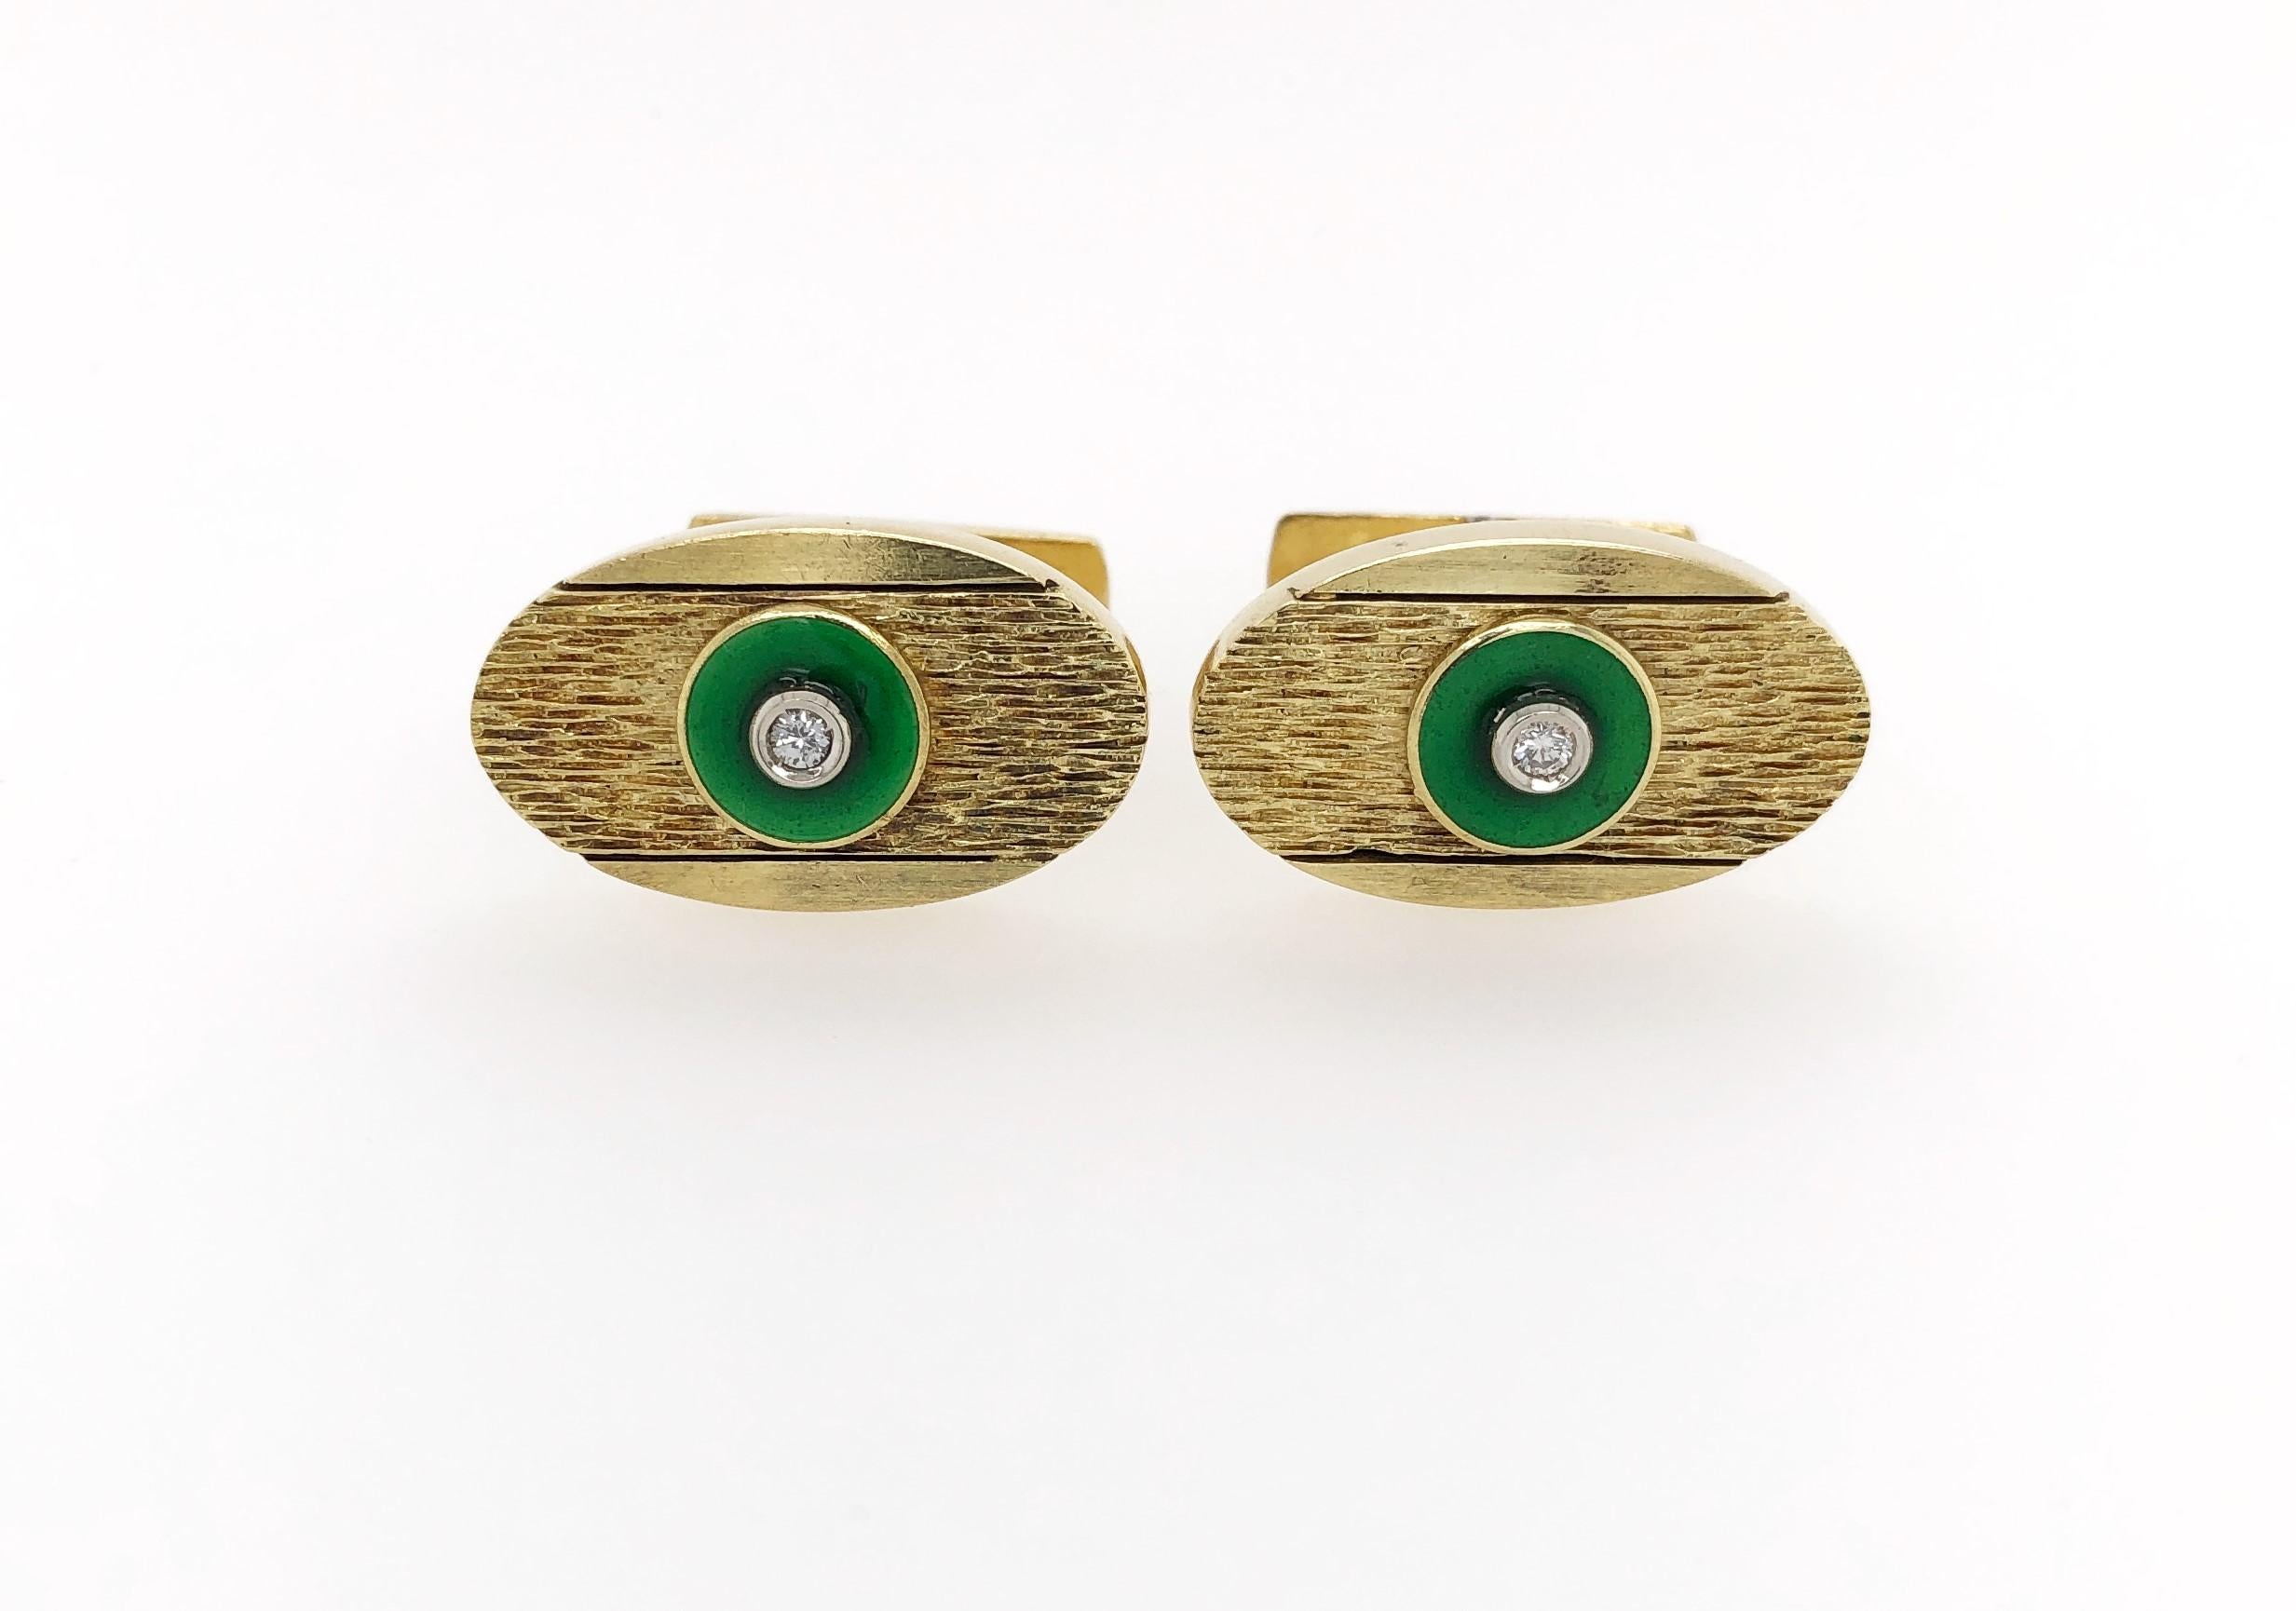 Diamond Accent 18 Karat Yellow Gold Oval Cuff Links with Green Enamel In Excellent Condition For Sale In Mount Kisco, NY